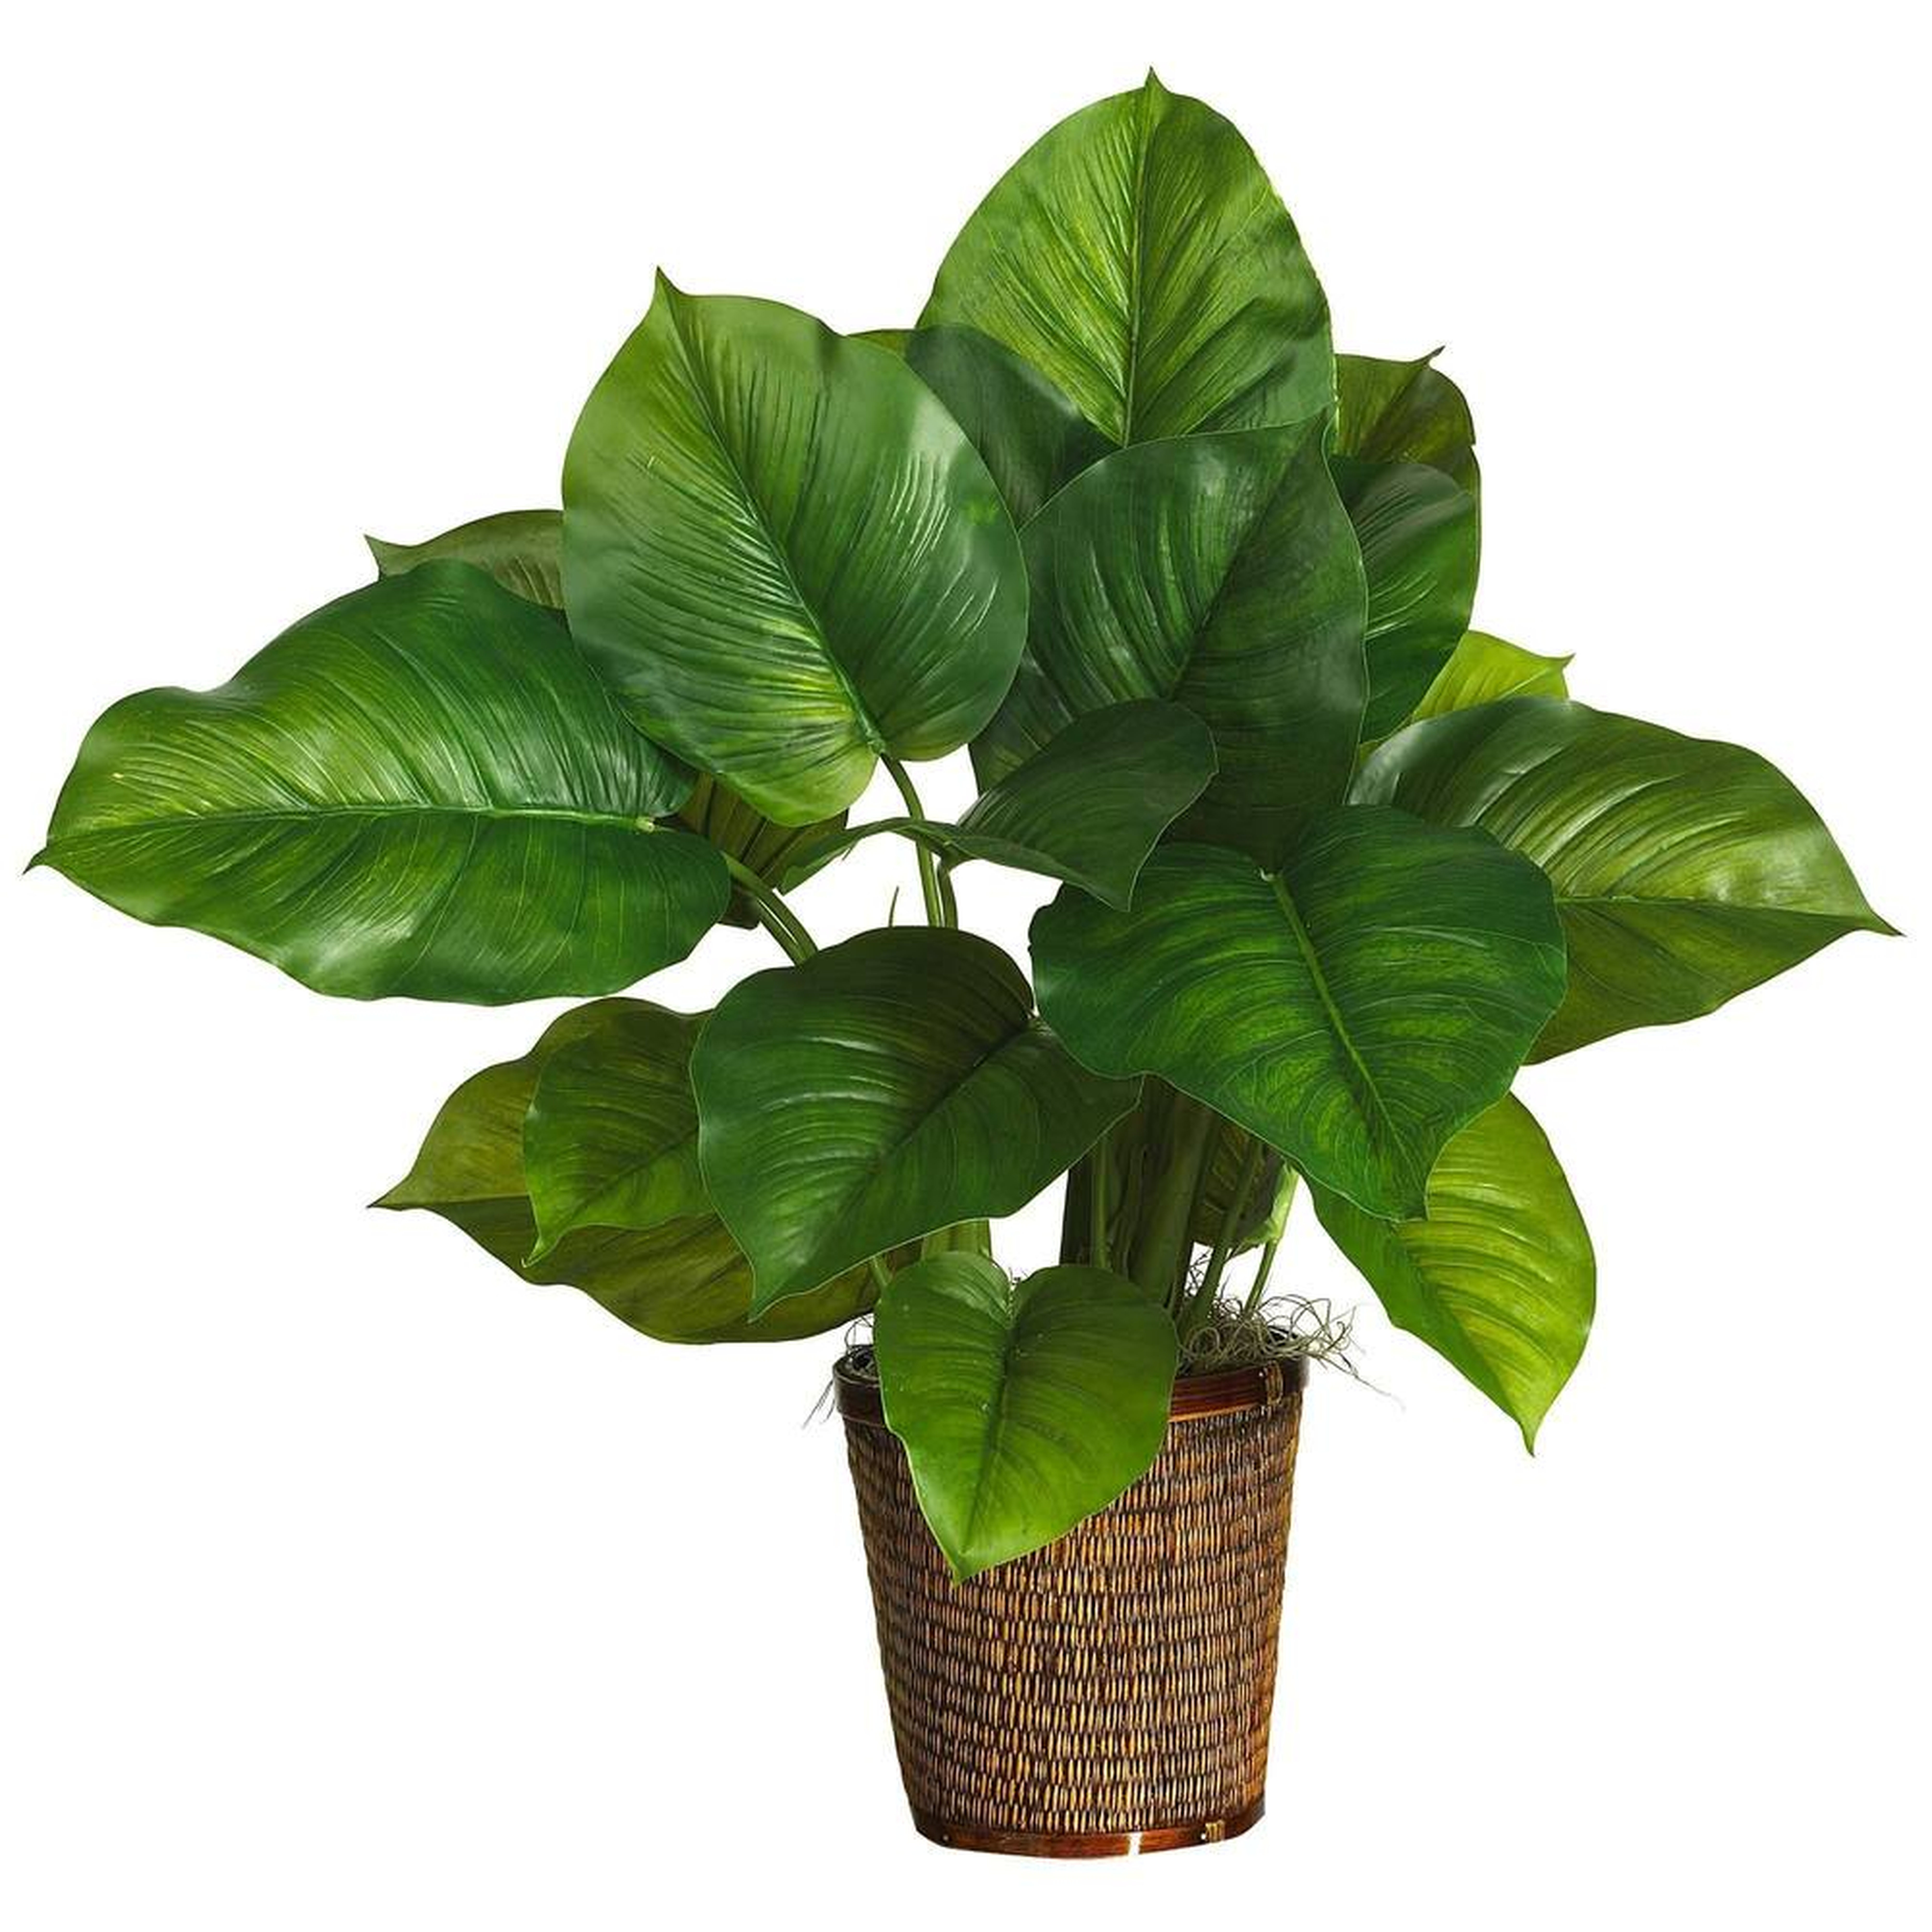 29" Large Leaf Philodendron Silk Plant (Real Touch) - Fiddle + Bloom